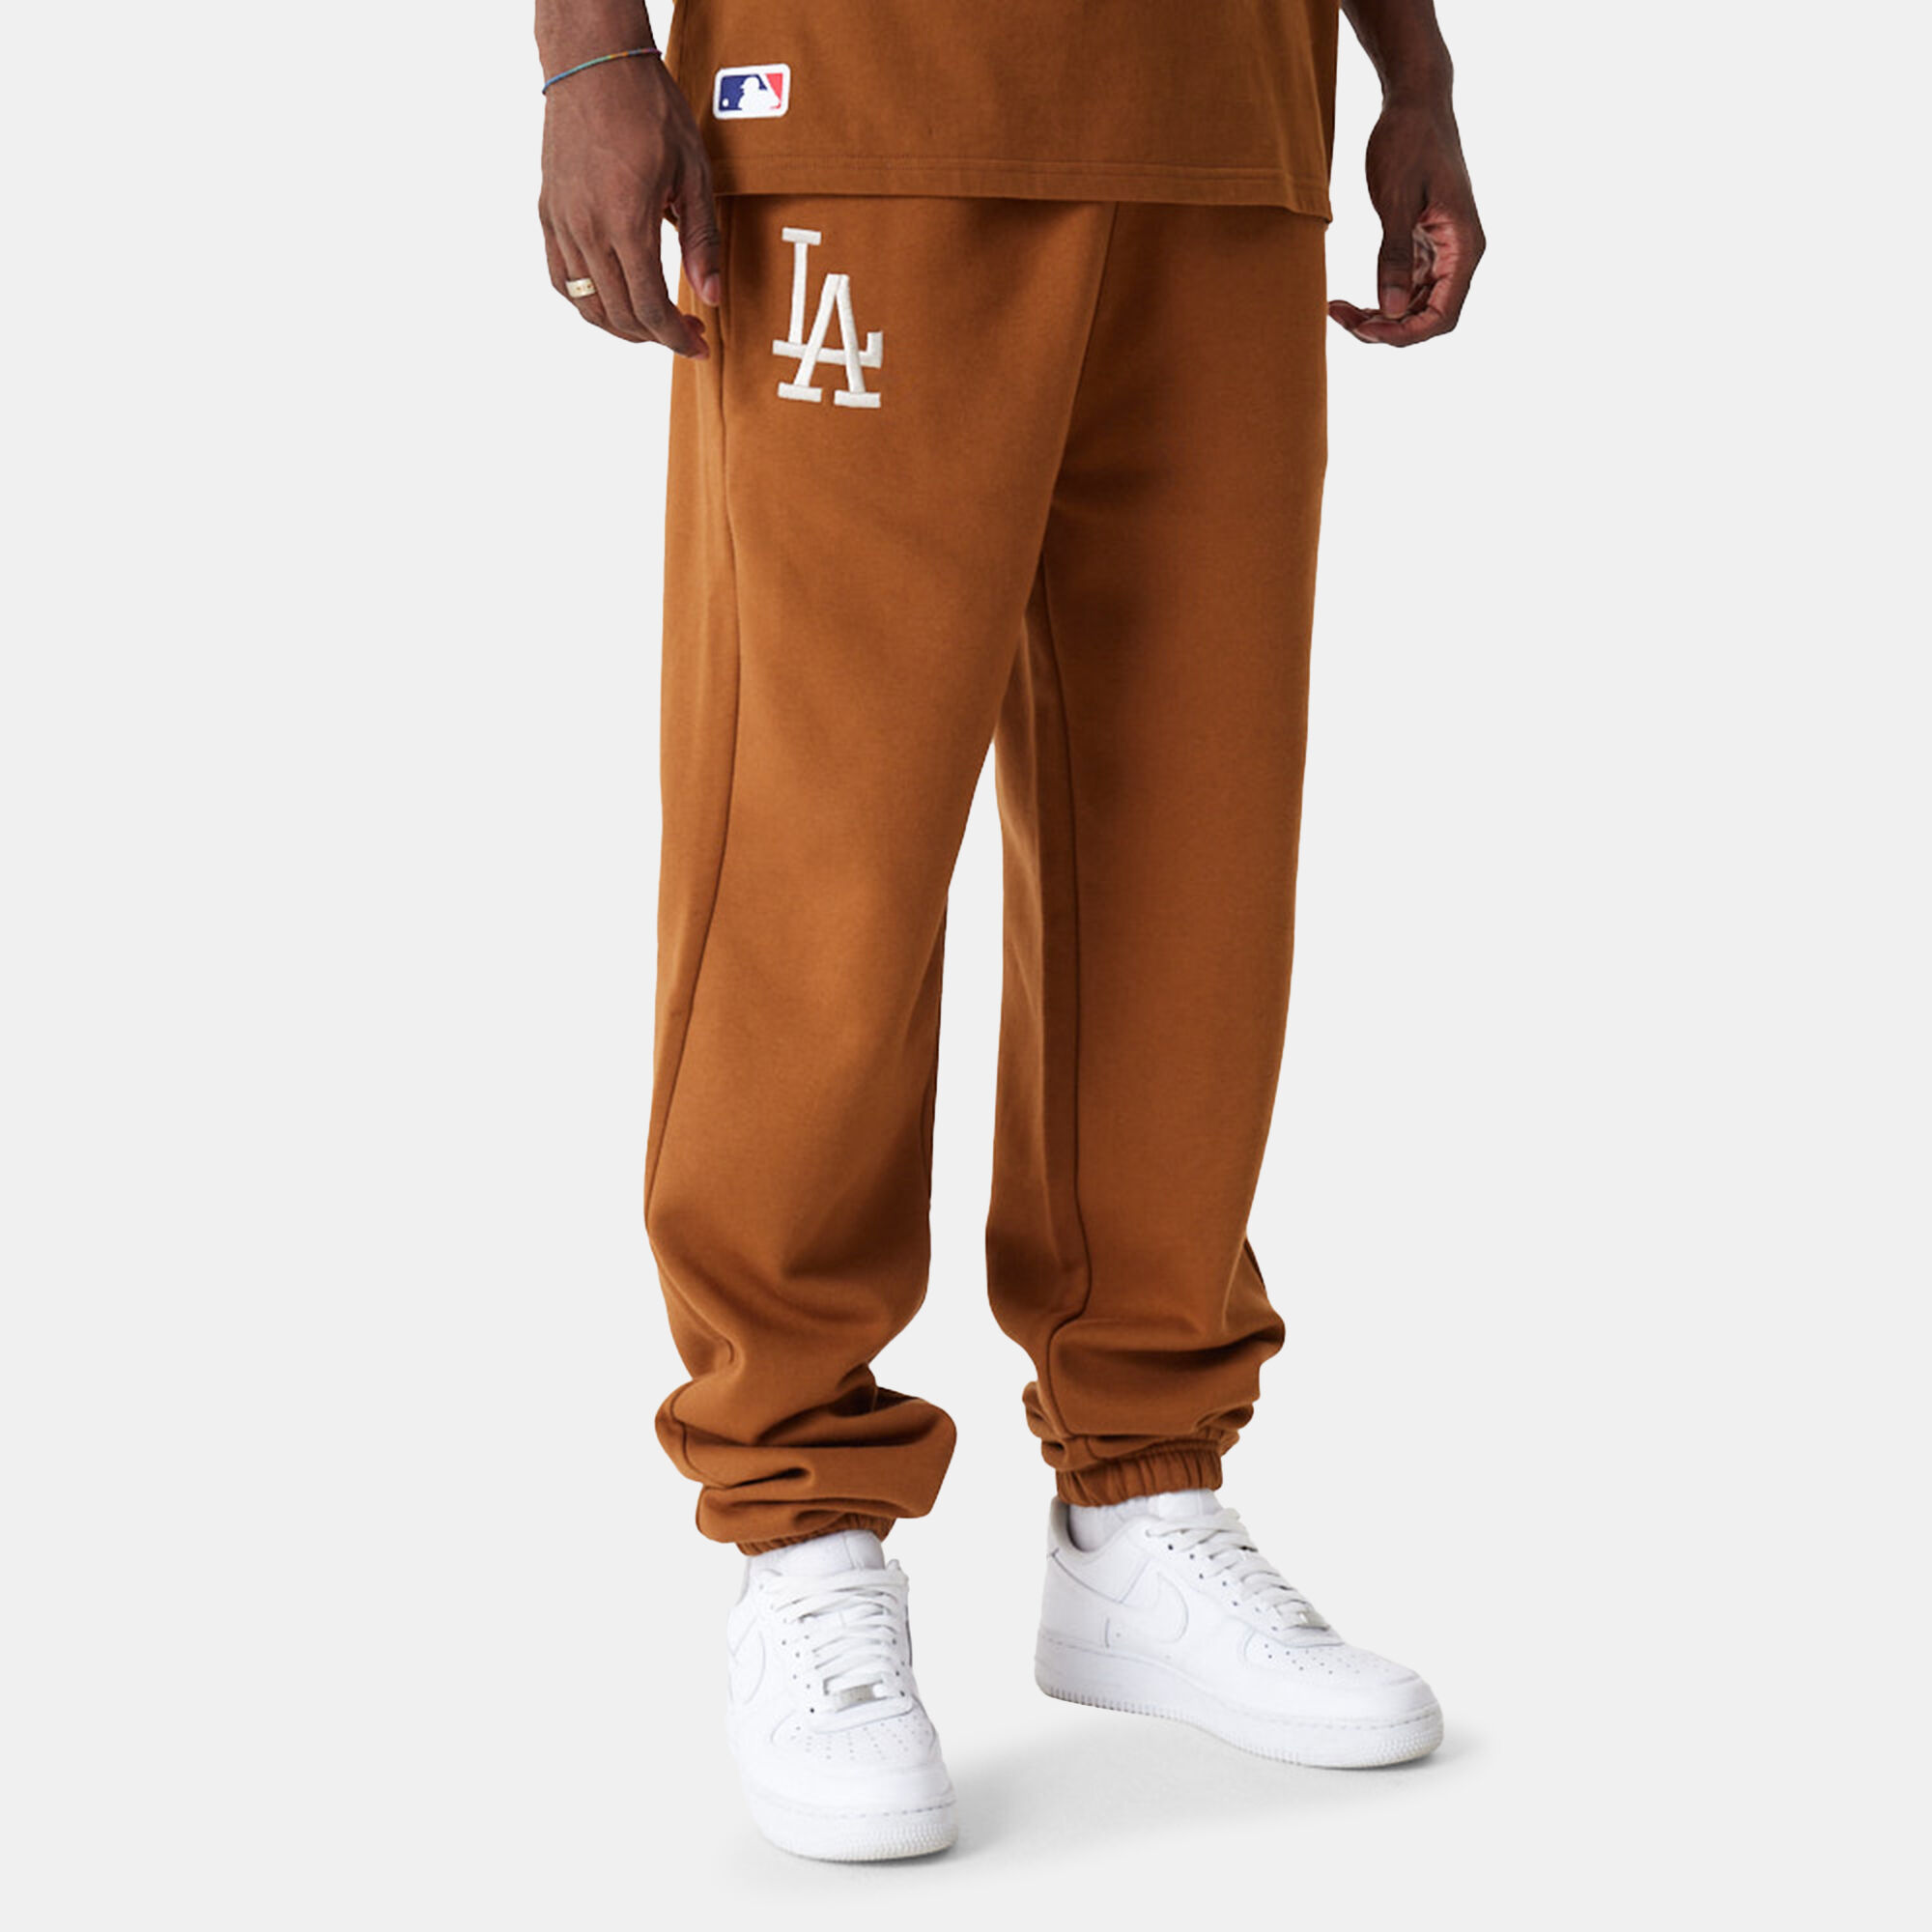 Nano Boys Twill Pants with Elastic Cuffs in Brown